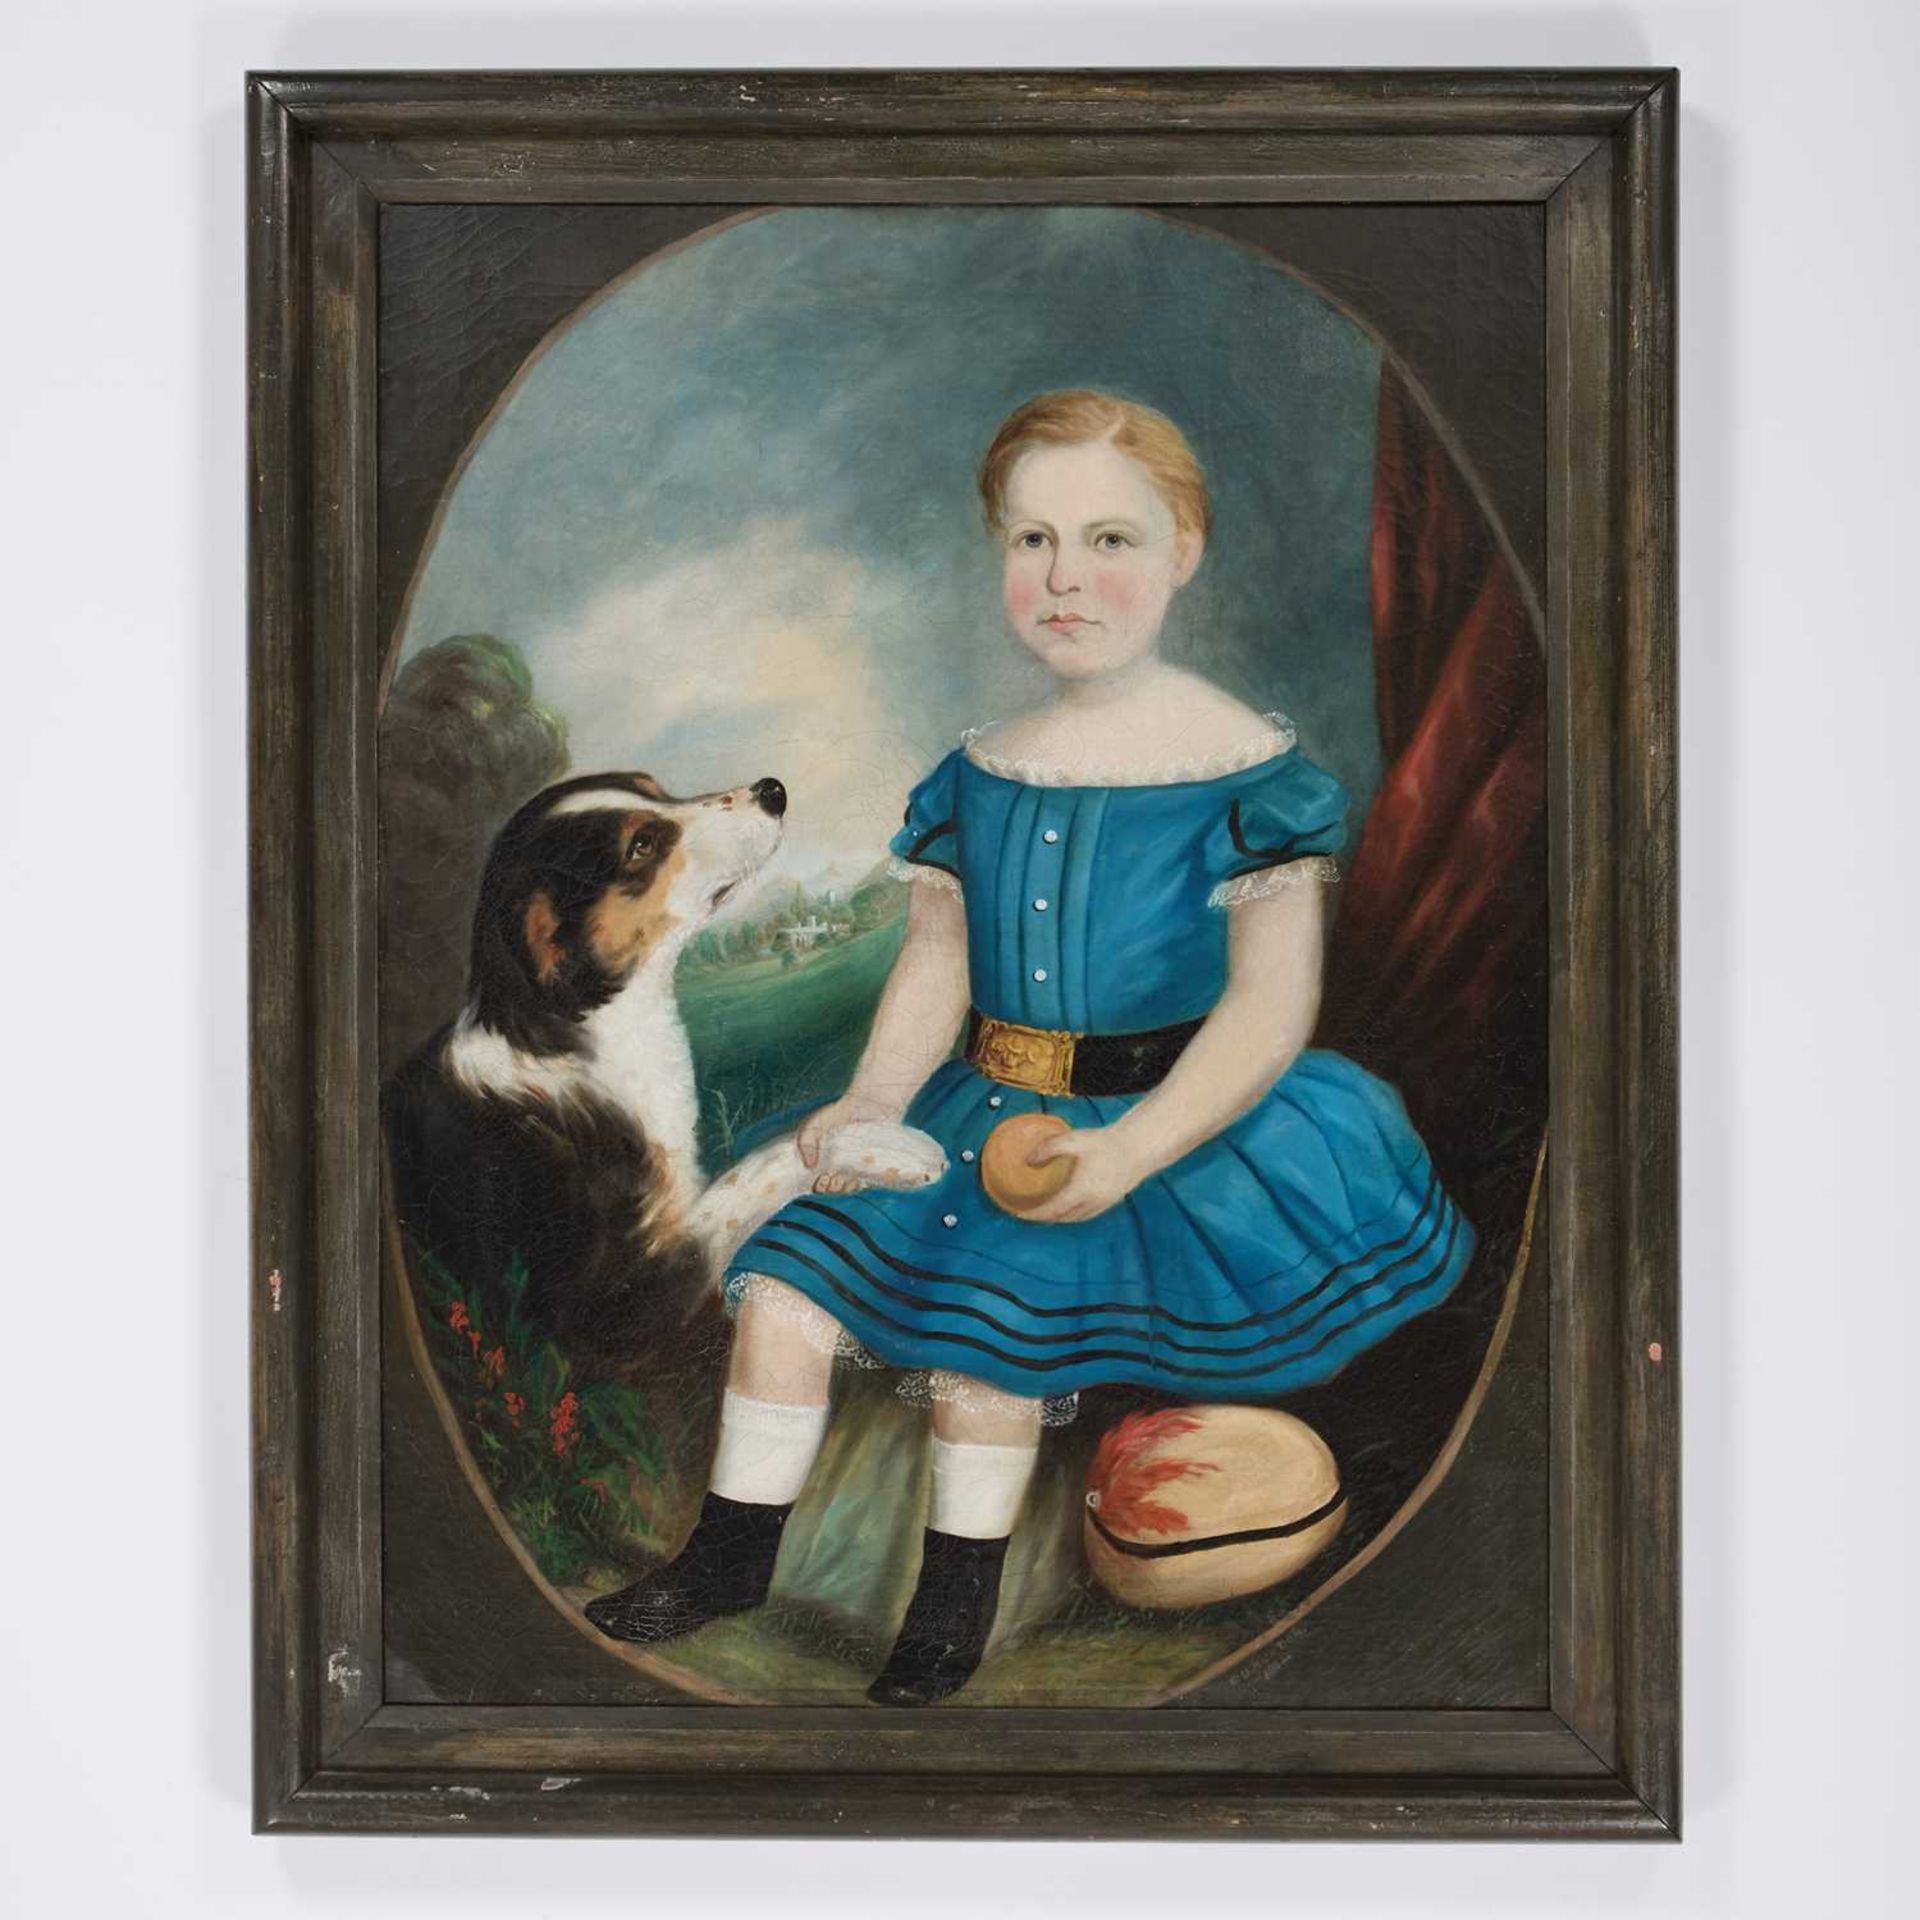 19TH CENTURY NAIVE SCHOOL PORTRAIT OF A GIRL AND HER DOG - Image 2 of 3